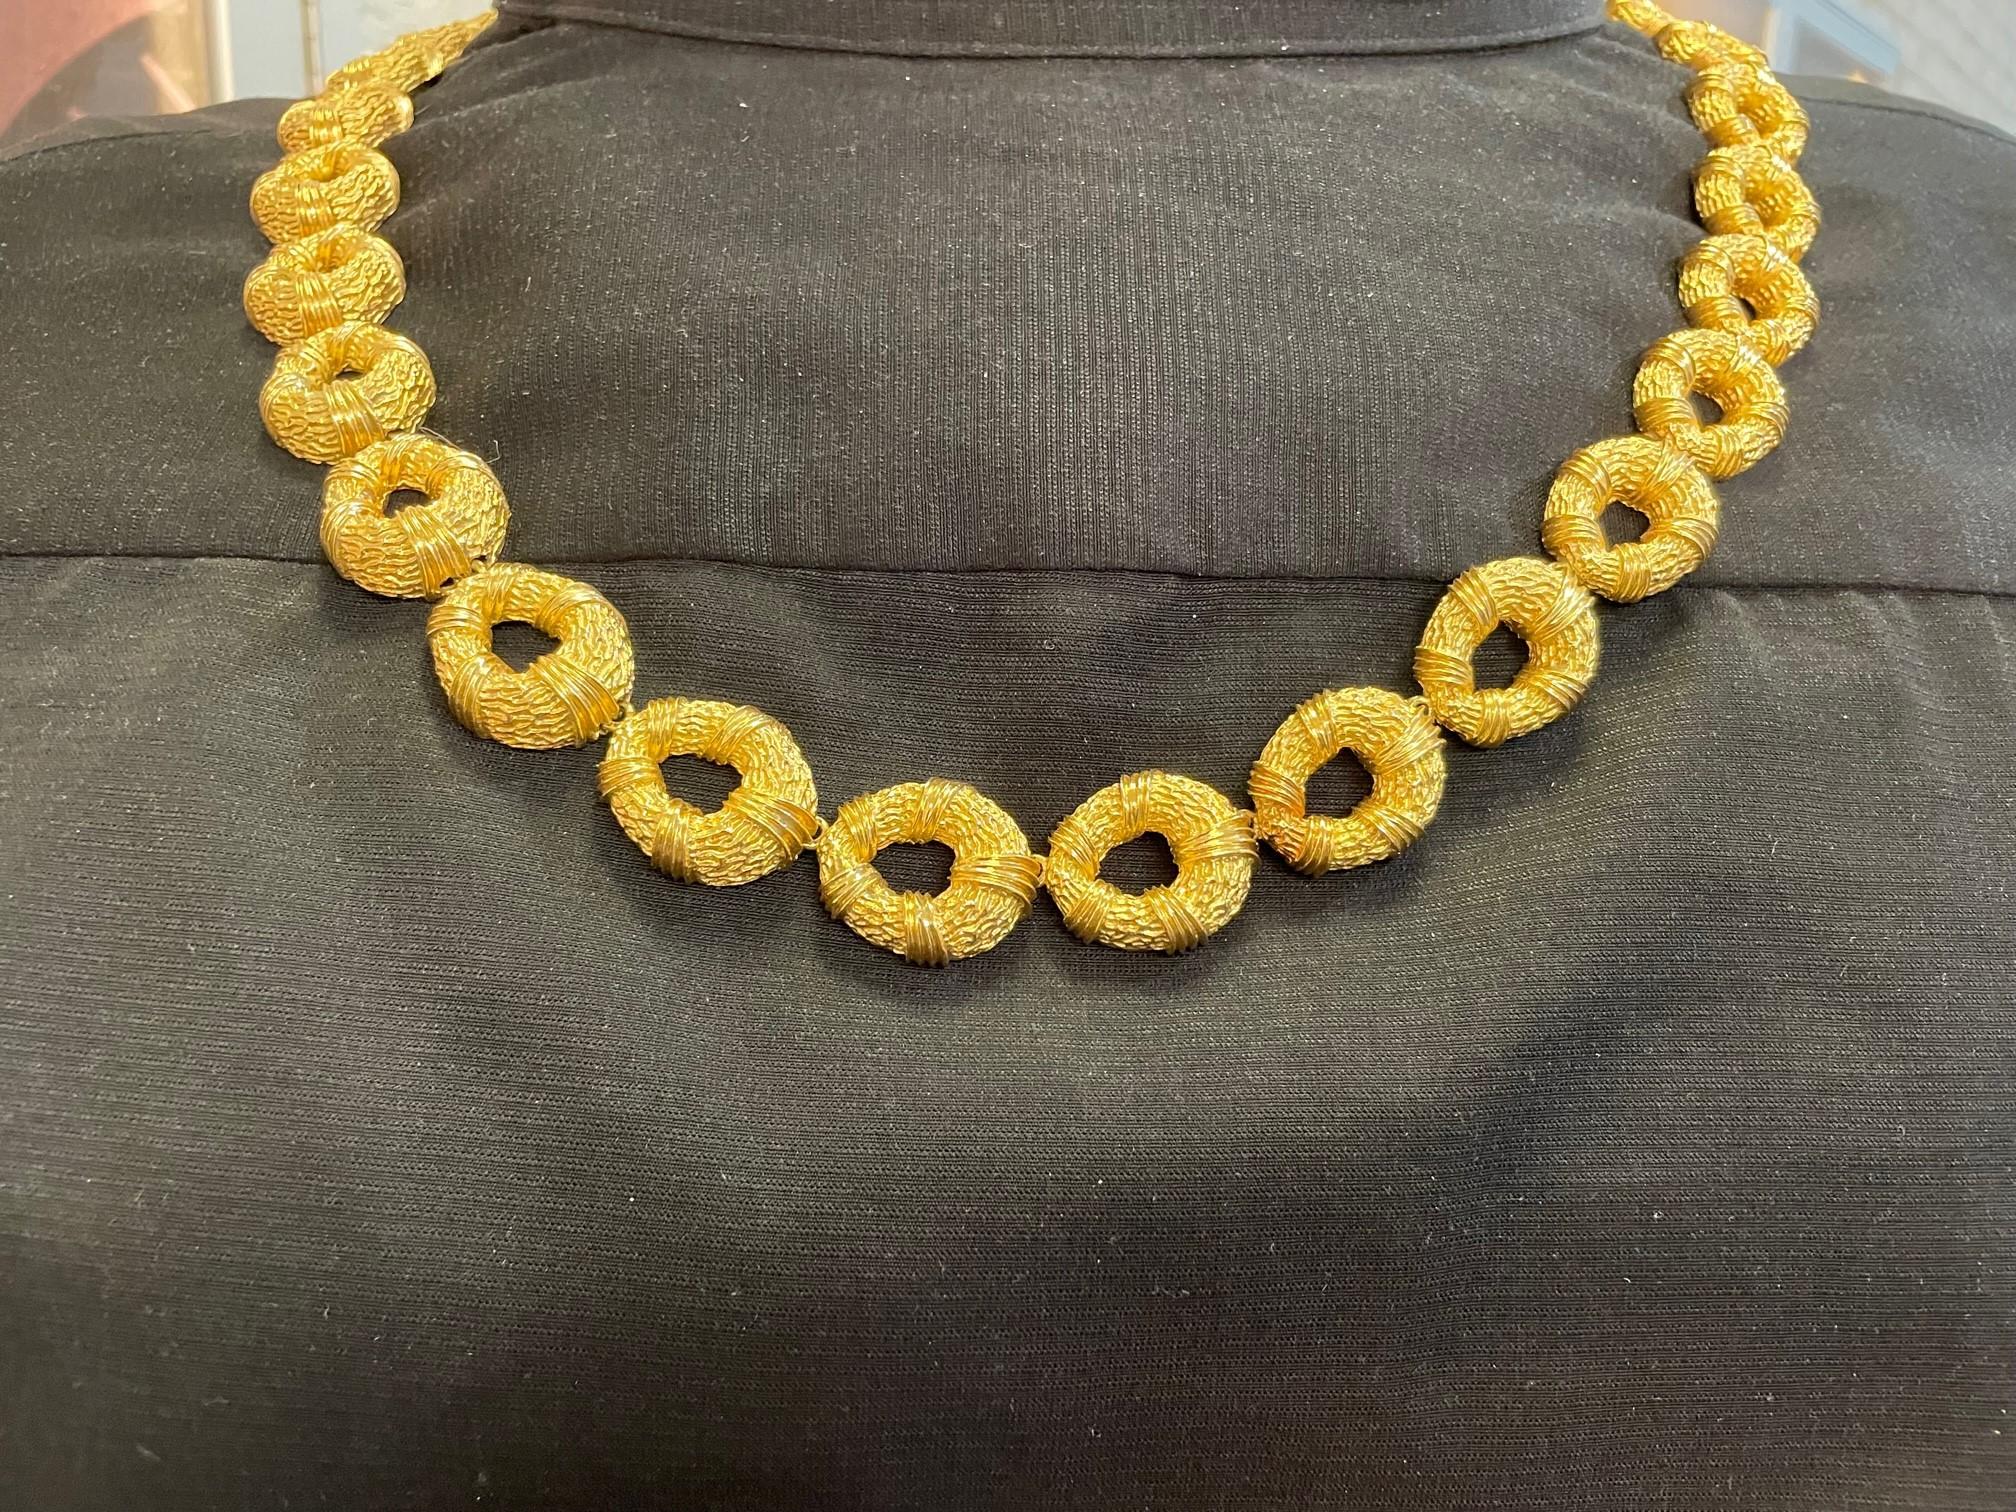 Vintage 18K yellow gold 34 inch oval link necklace.  The necklace has a box
clasp and a textured finish.  The necklace weighs 186dwt., circa 1970s. 